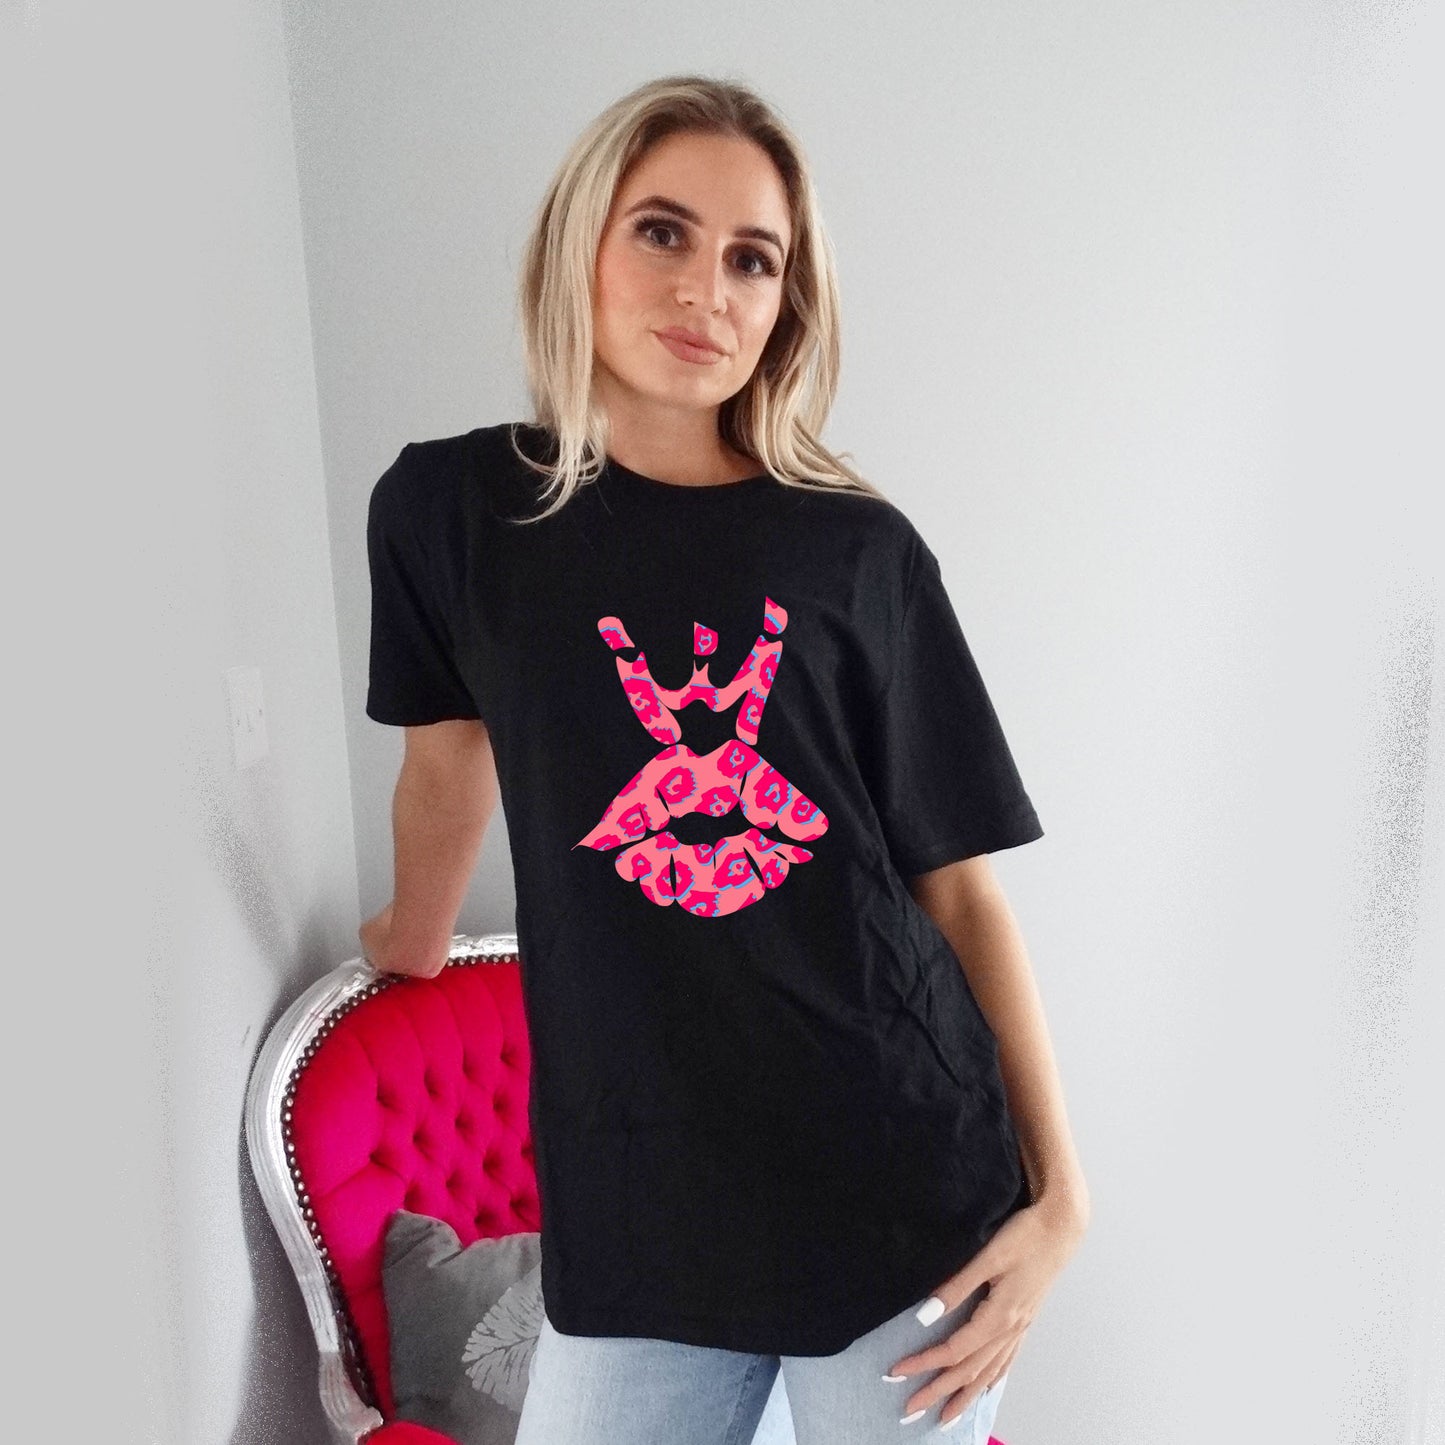 Black Tshirt With Pink and Blue Leopard Royal Kiss Print